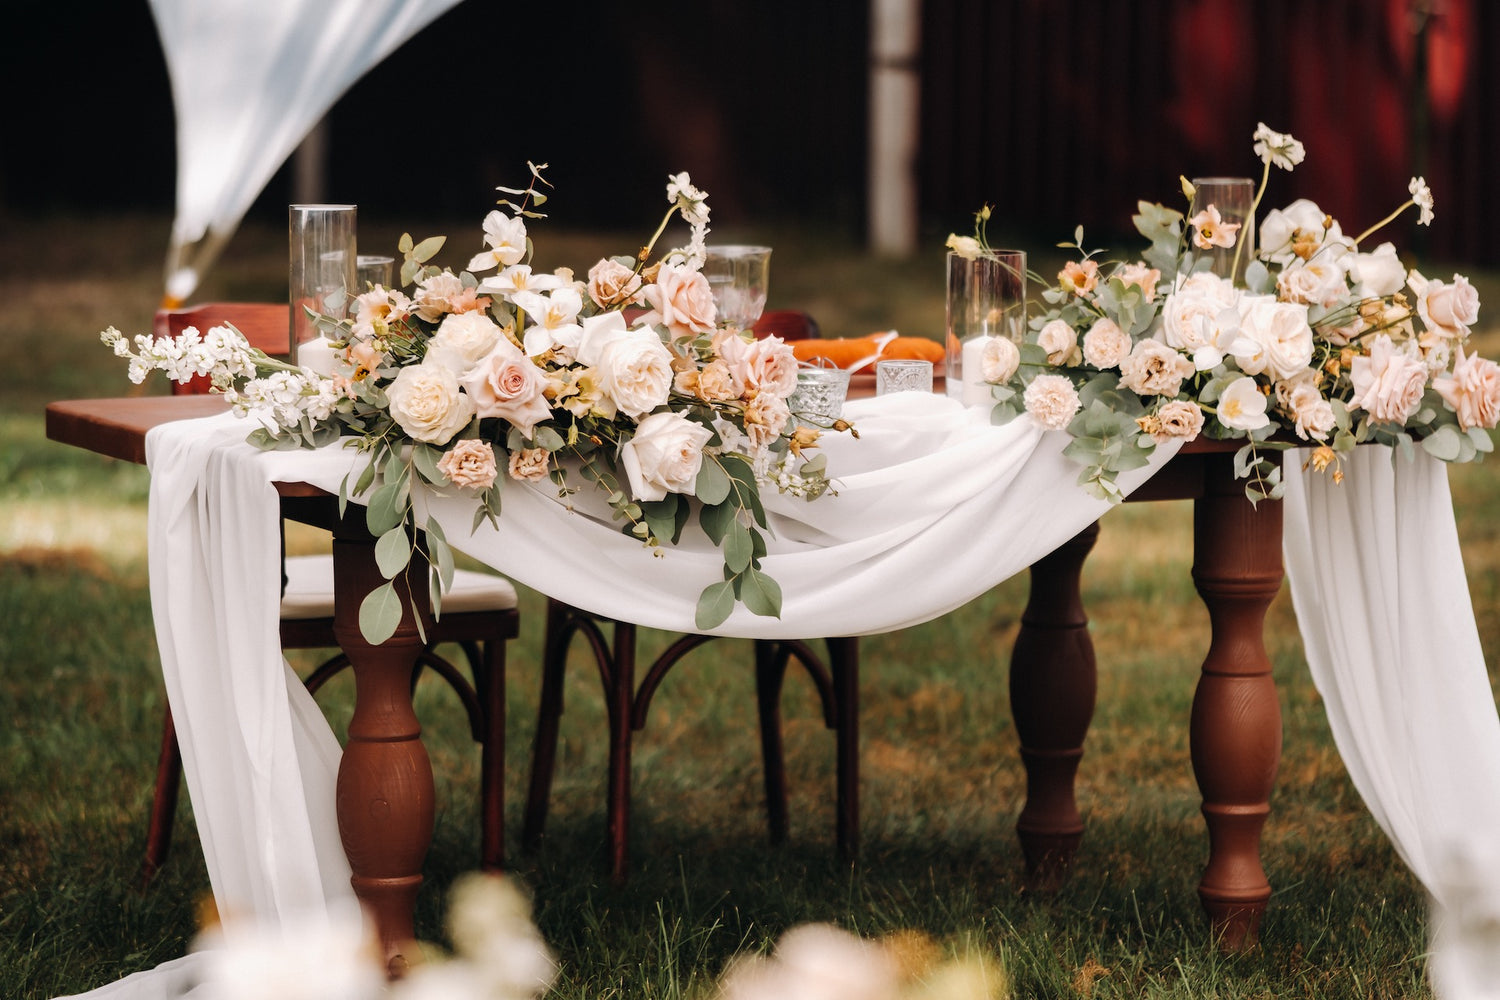 wedding-table-decoration-with-flowers-on-the-table